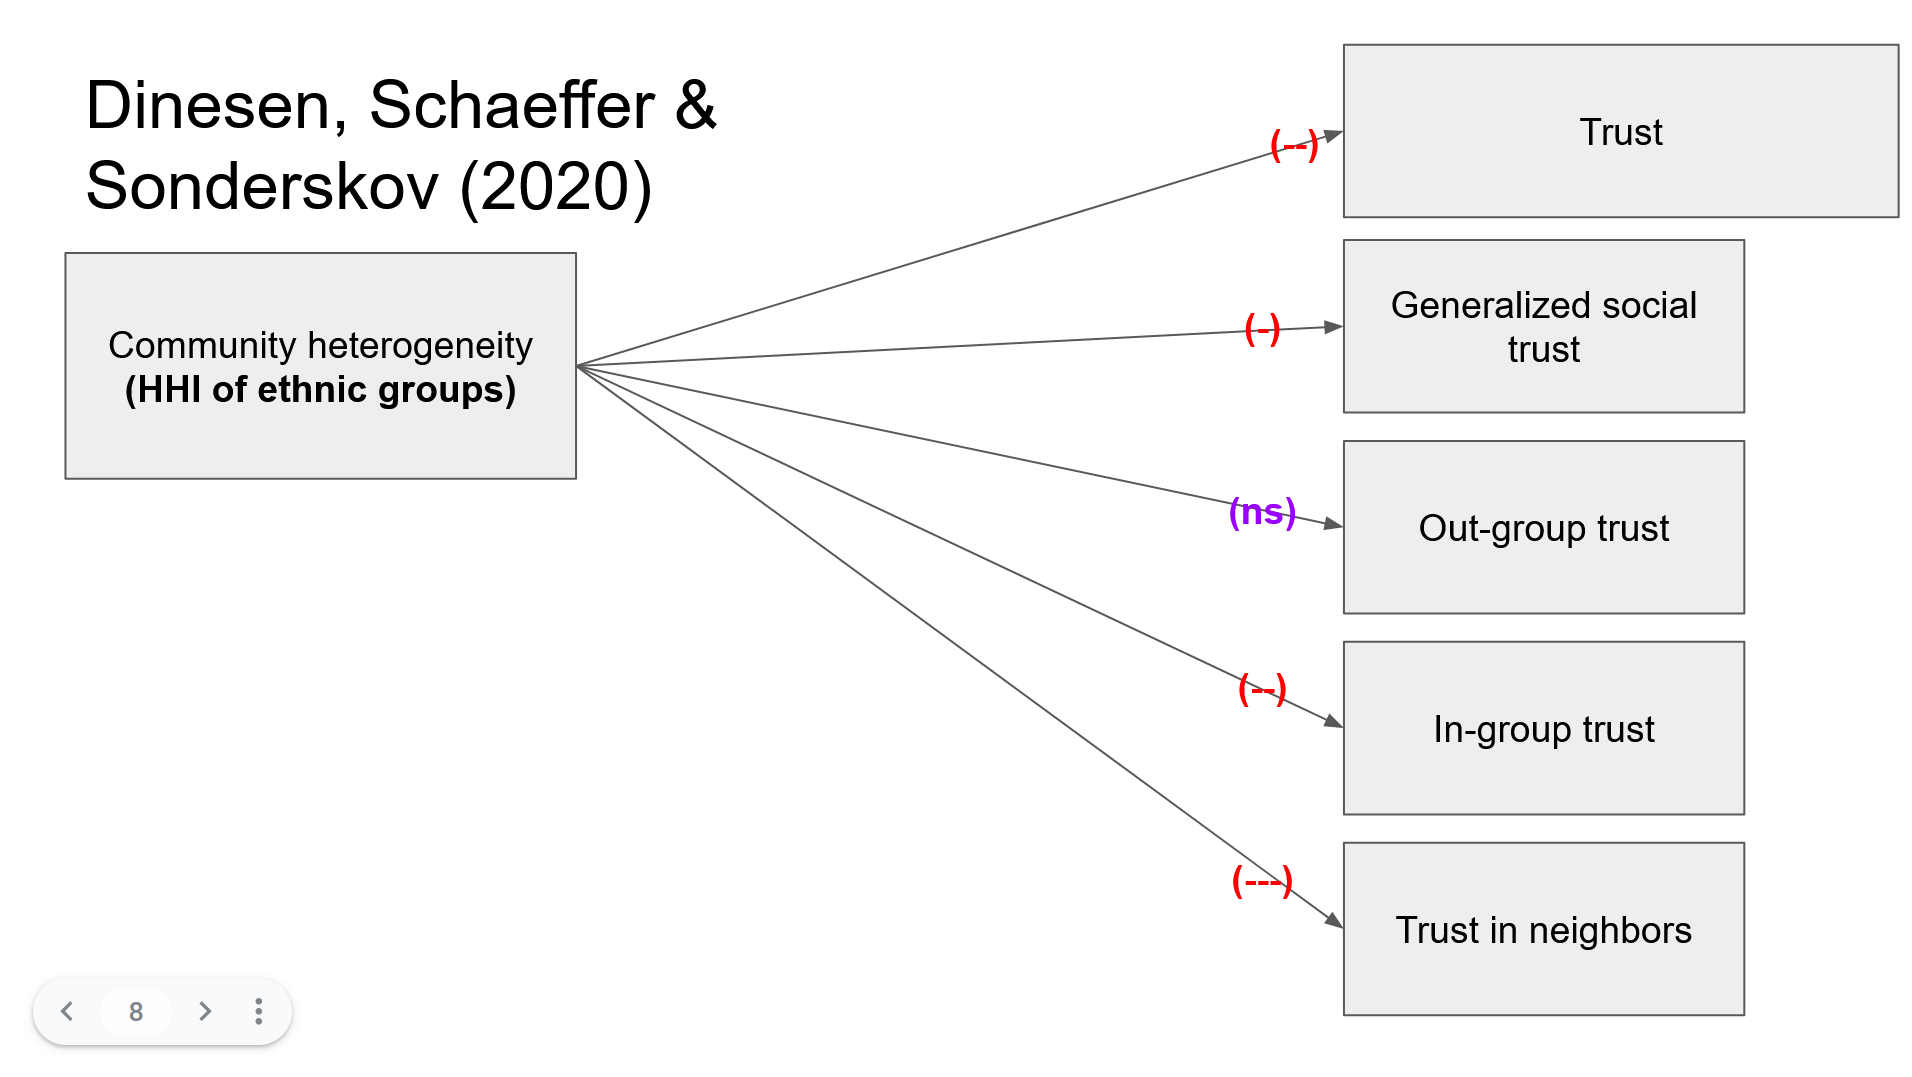 Concept map connecting community heterogeneity (independent variable) with various measures of trust (dependent variables).